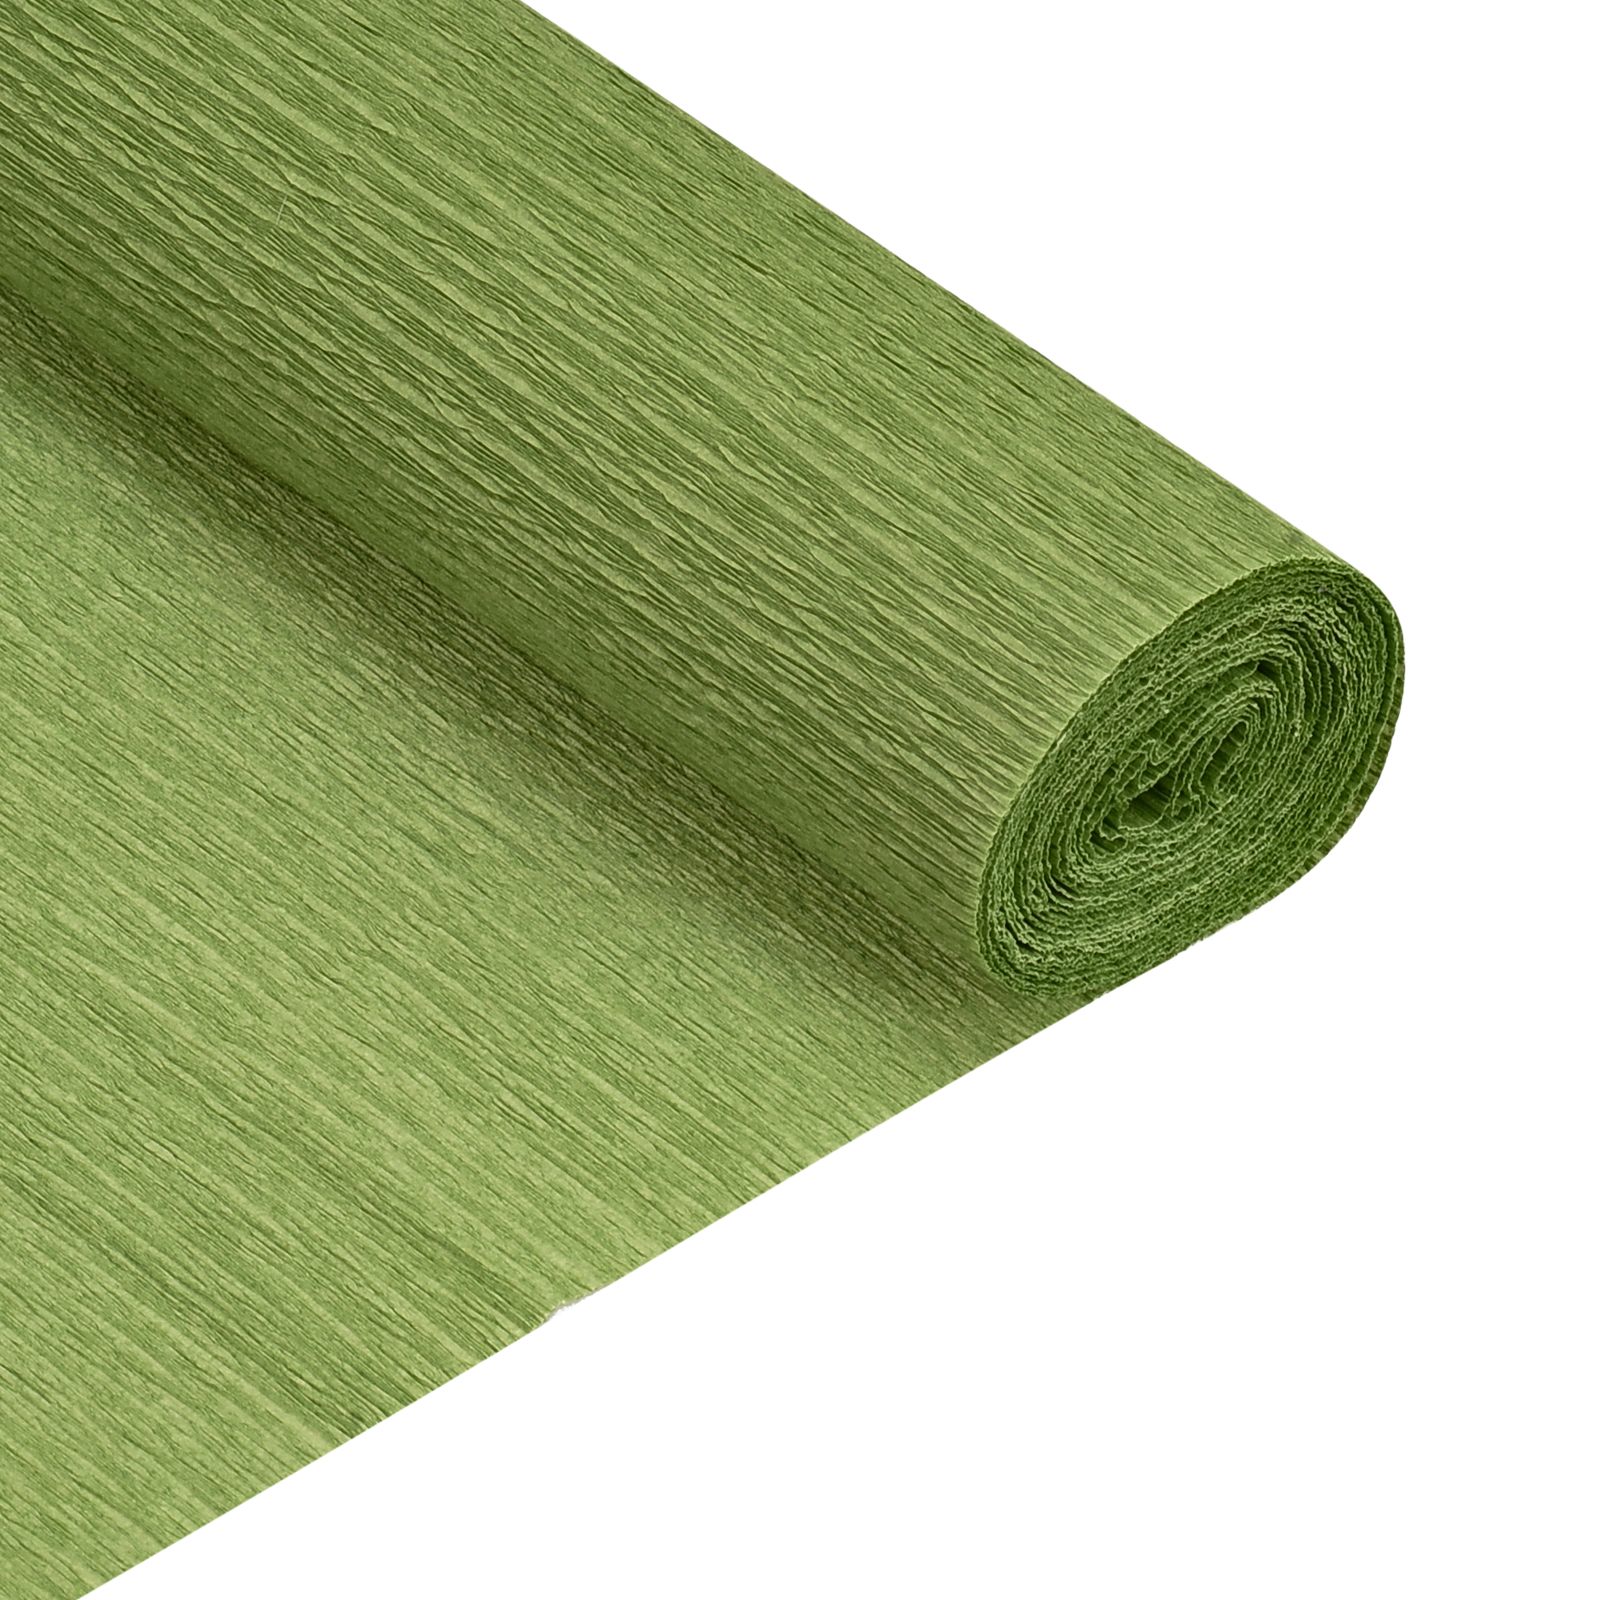 Crepe Paper Roll Crepe Paper Decoration 7.5ft Long 20 Inch Wide, Olive Green